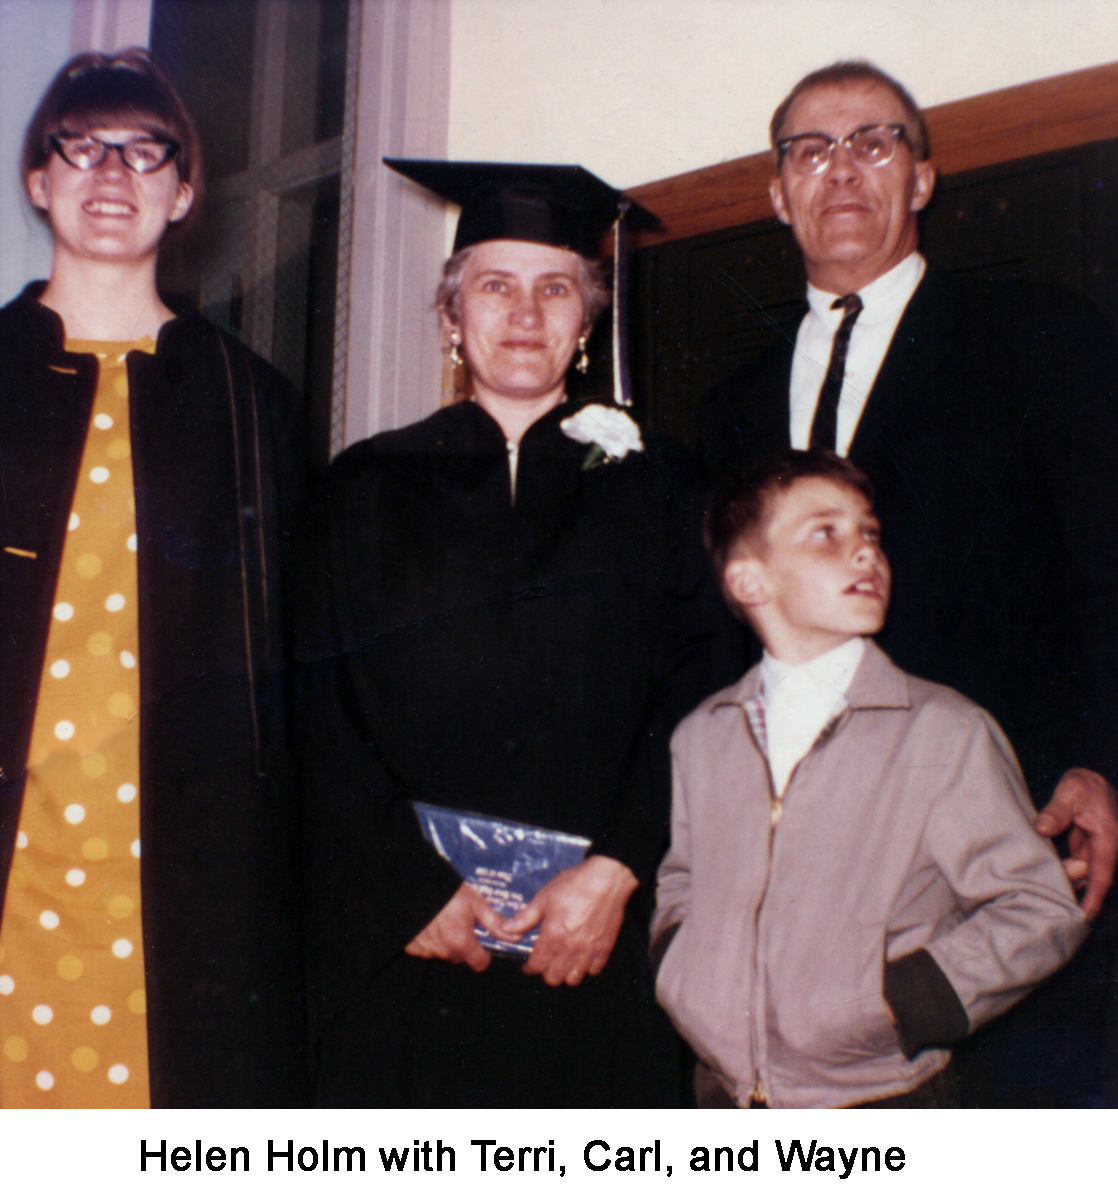 Helen is standing in her robe and mortar board. Carl is wearing 
     a suit and tie.